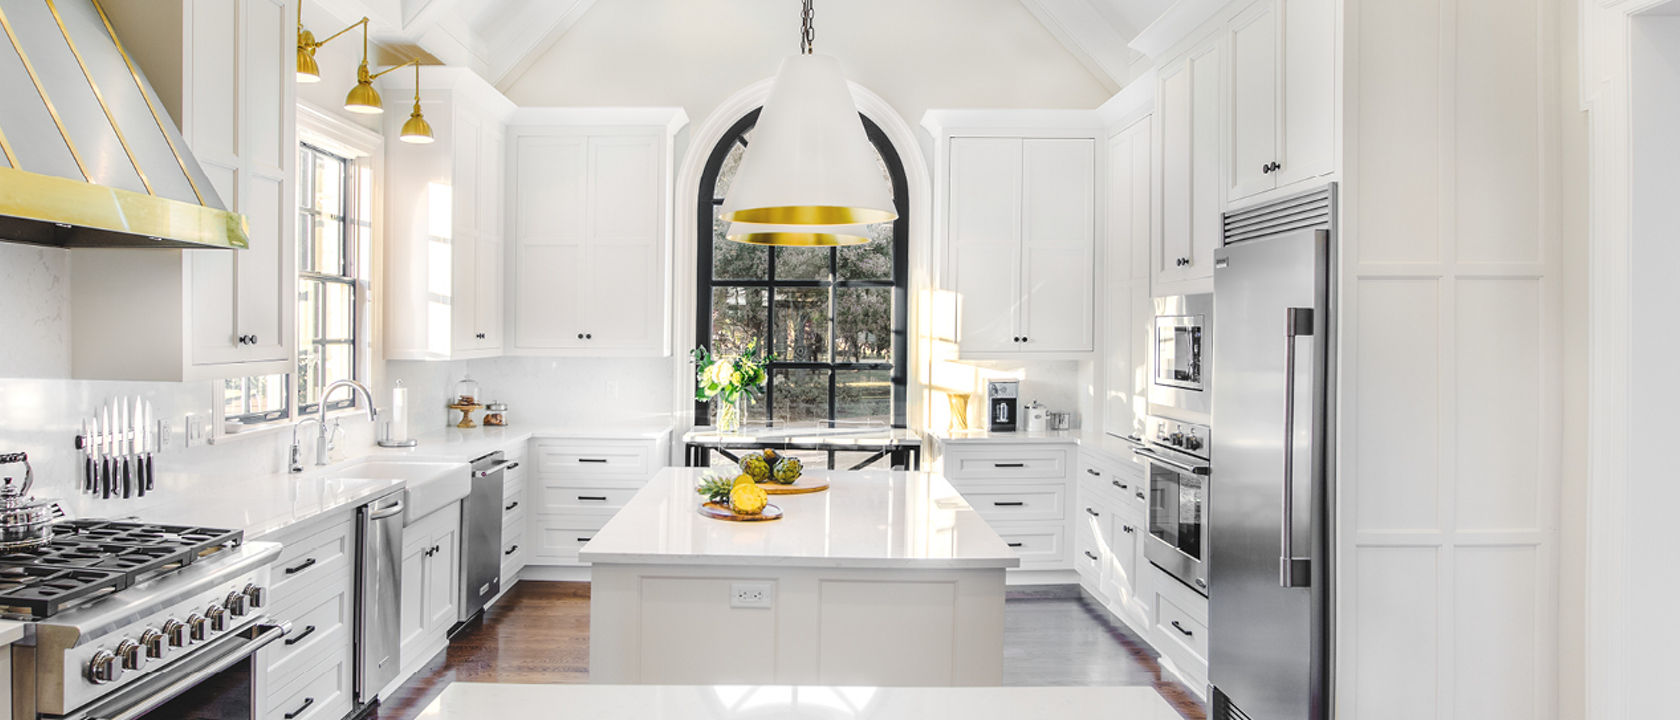 a french countryside inspired kitchen with two islands, white quartz countertops, white cabinets, and gold and black accents throughout.